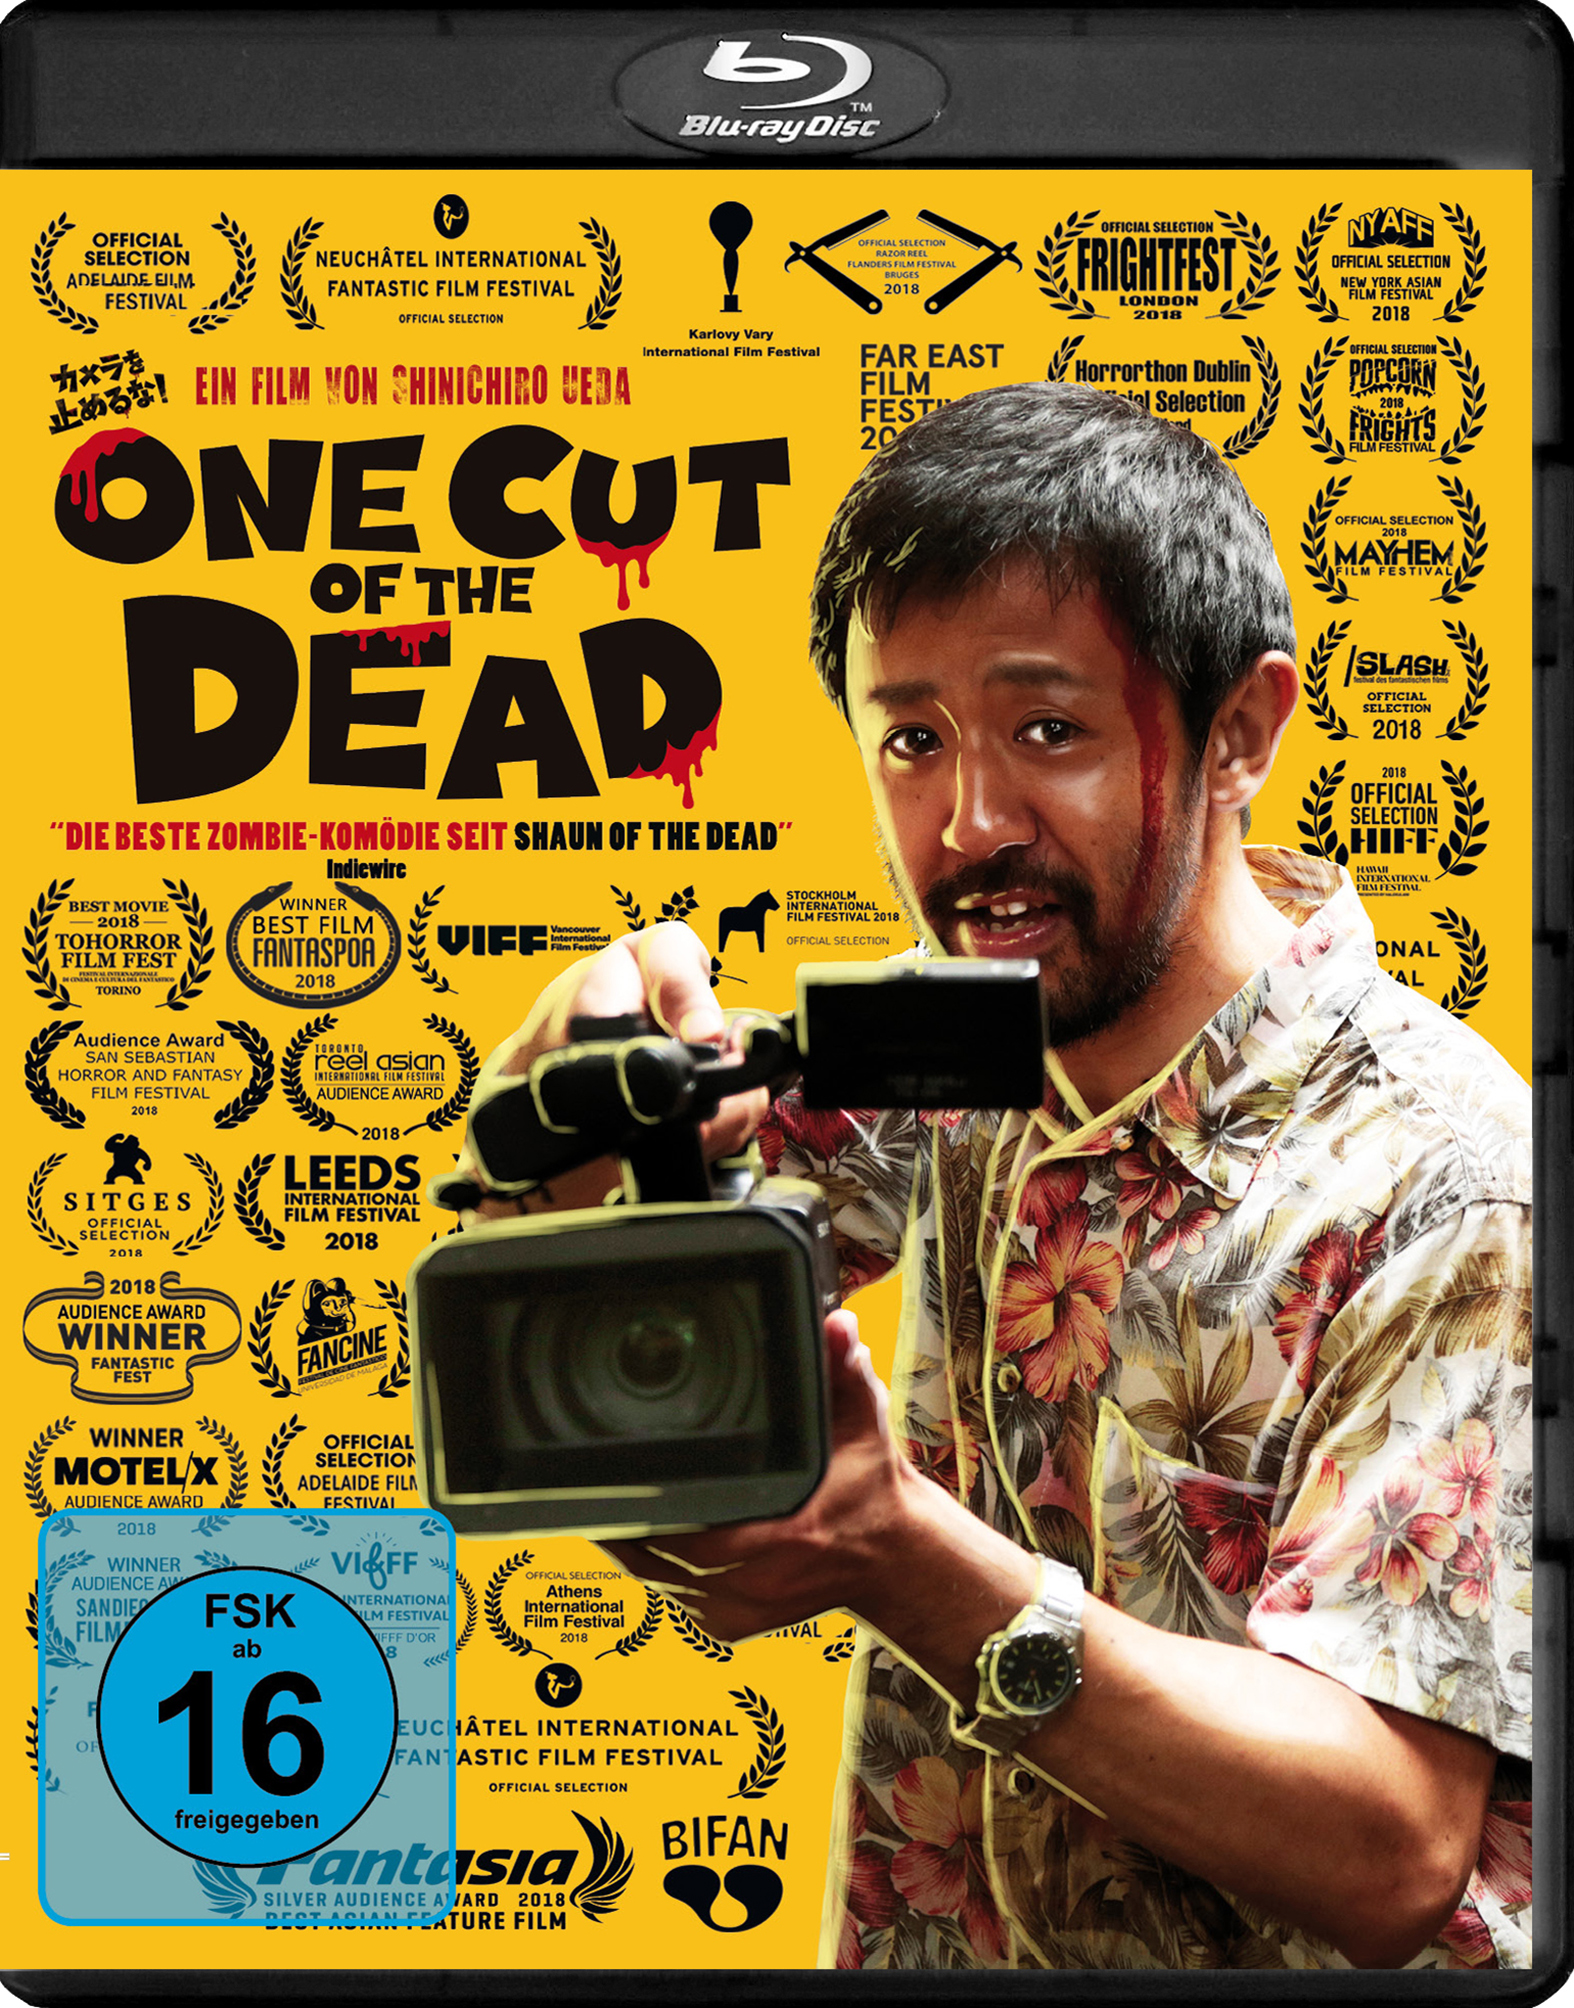 One Cut of the Dead (Blu-ray)